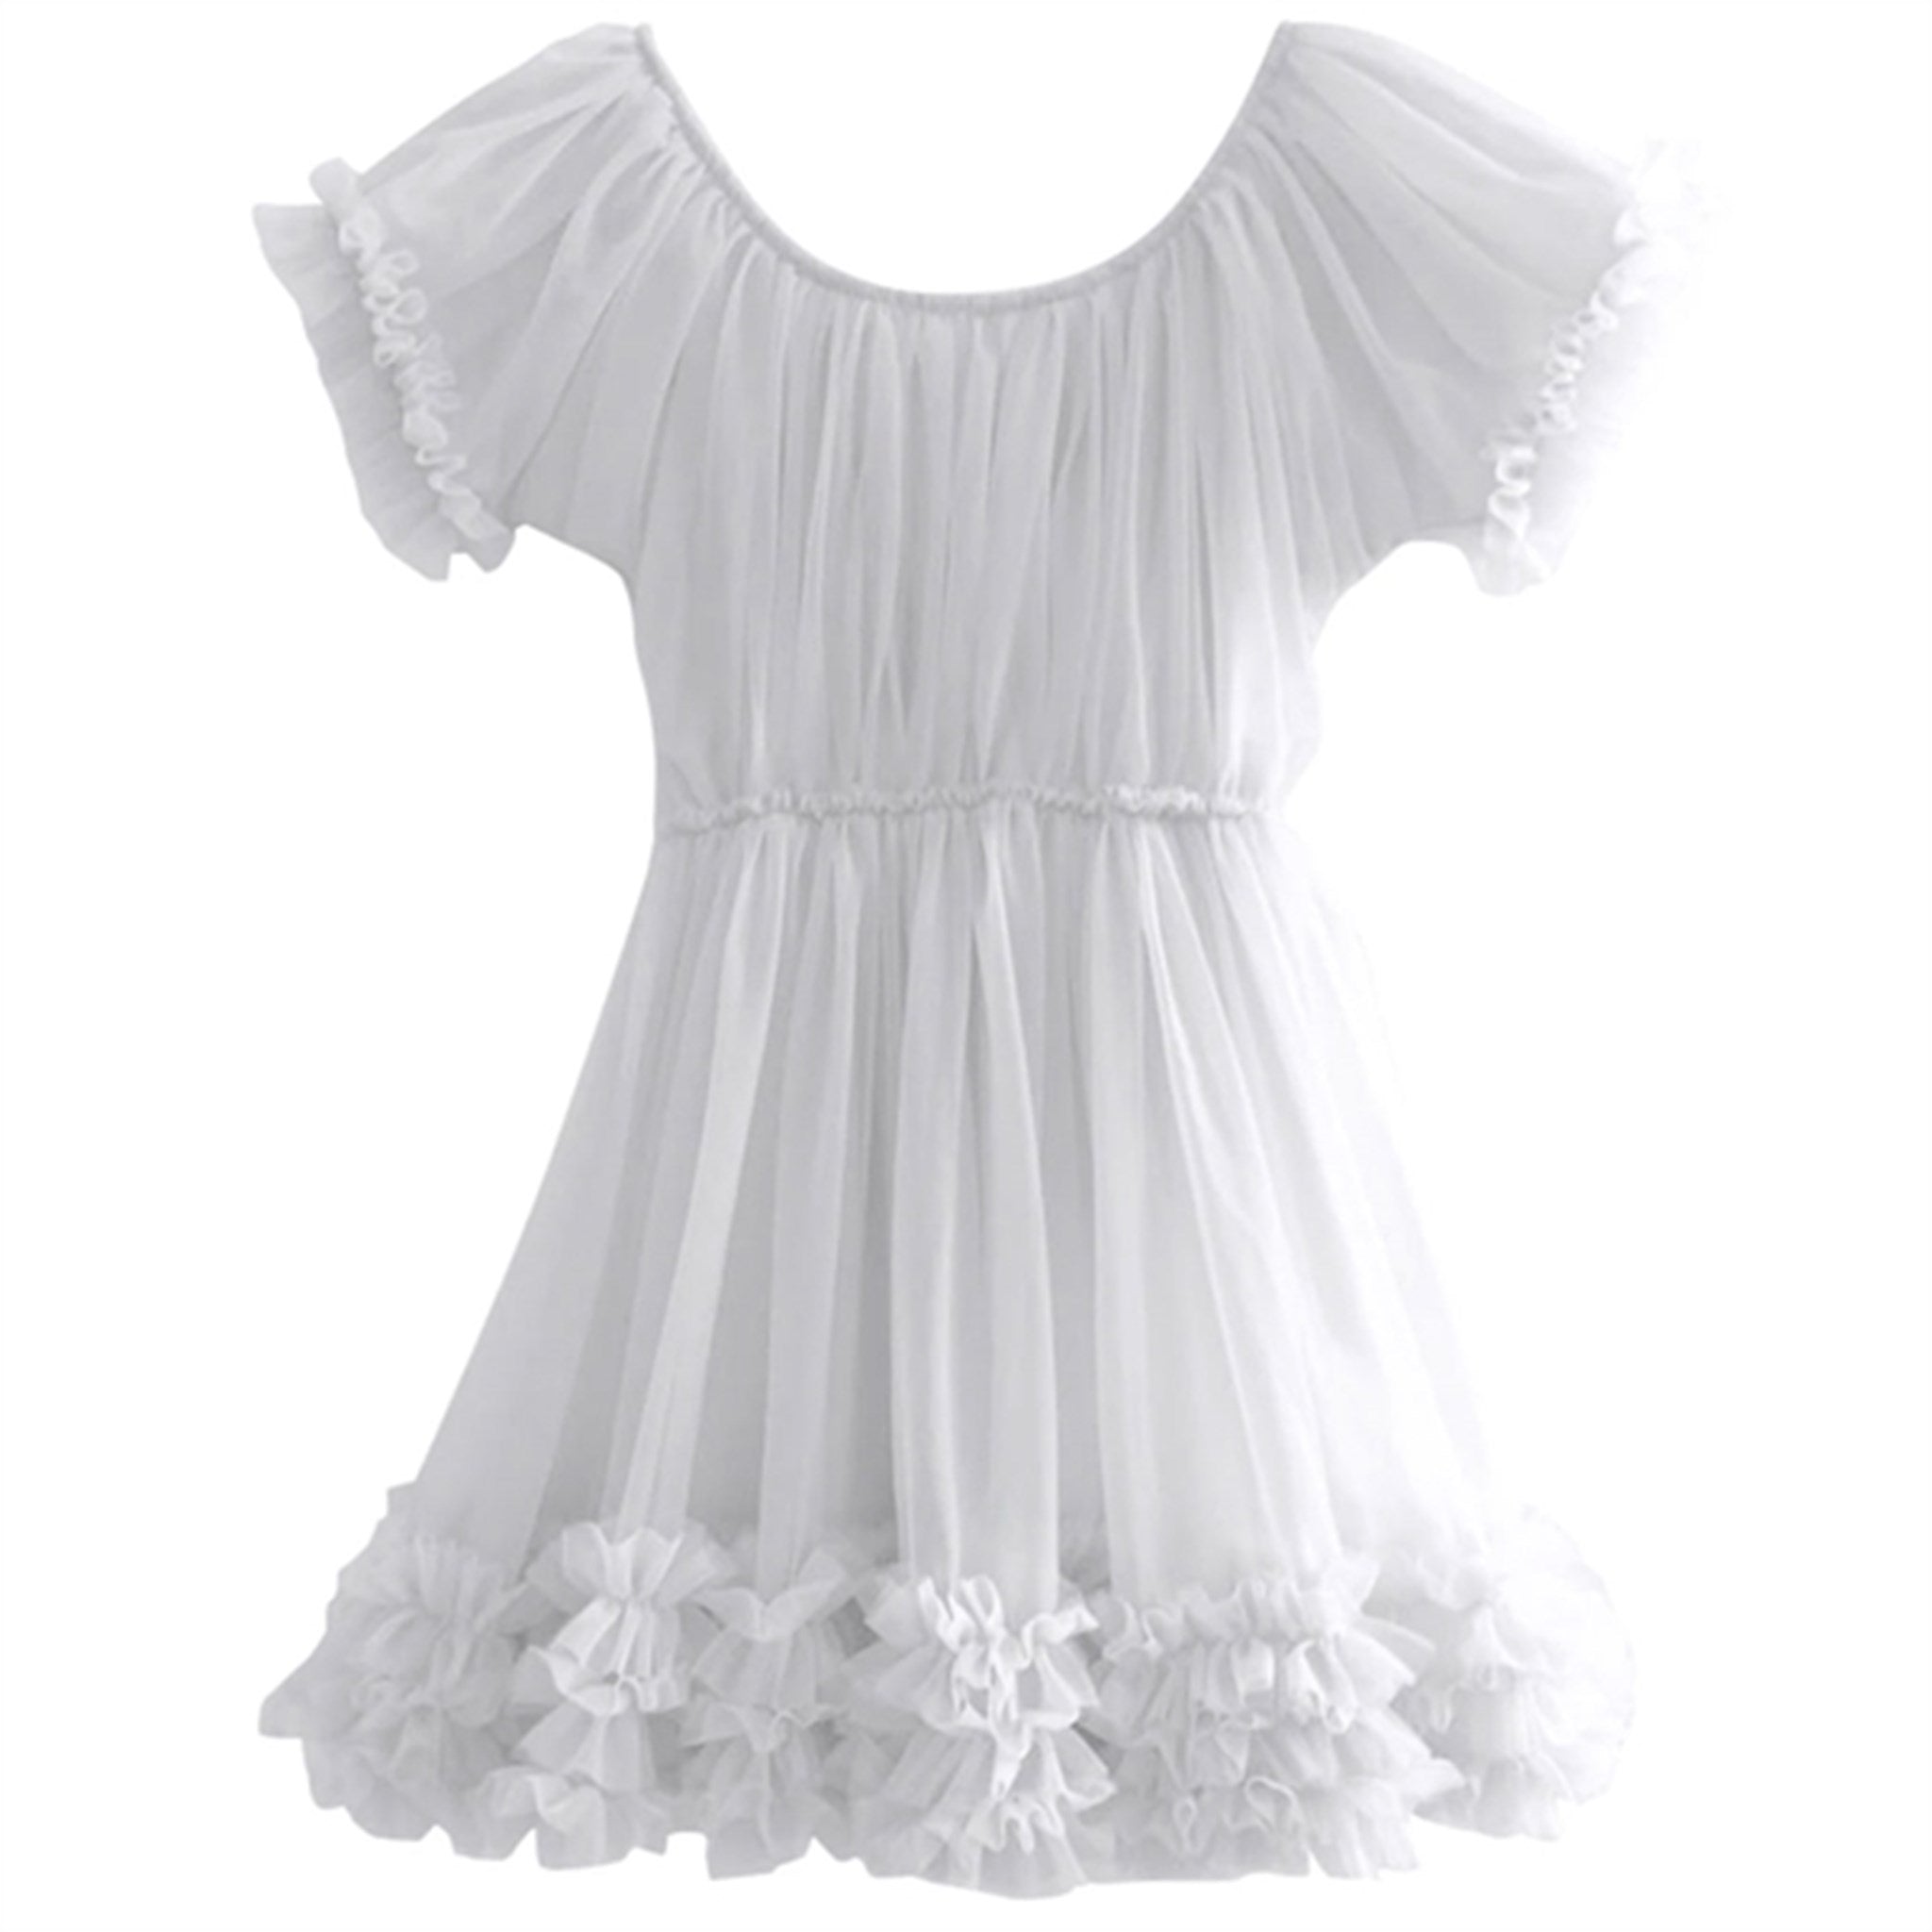 Dolly by Le Petit Frilly Dress Offwhite